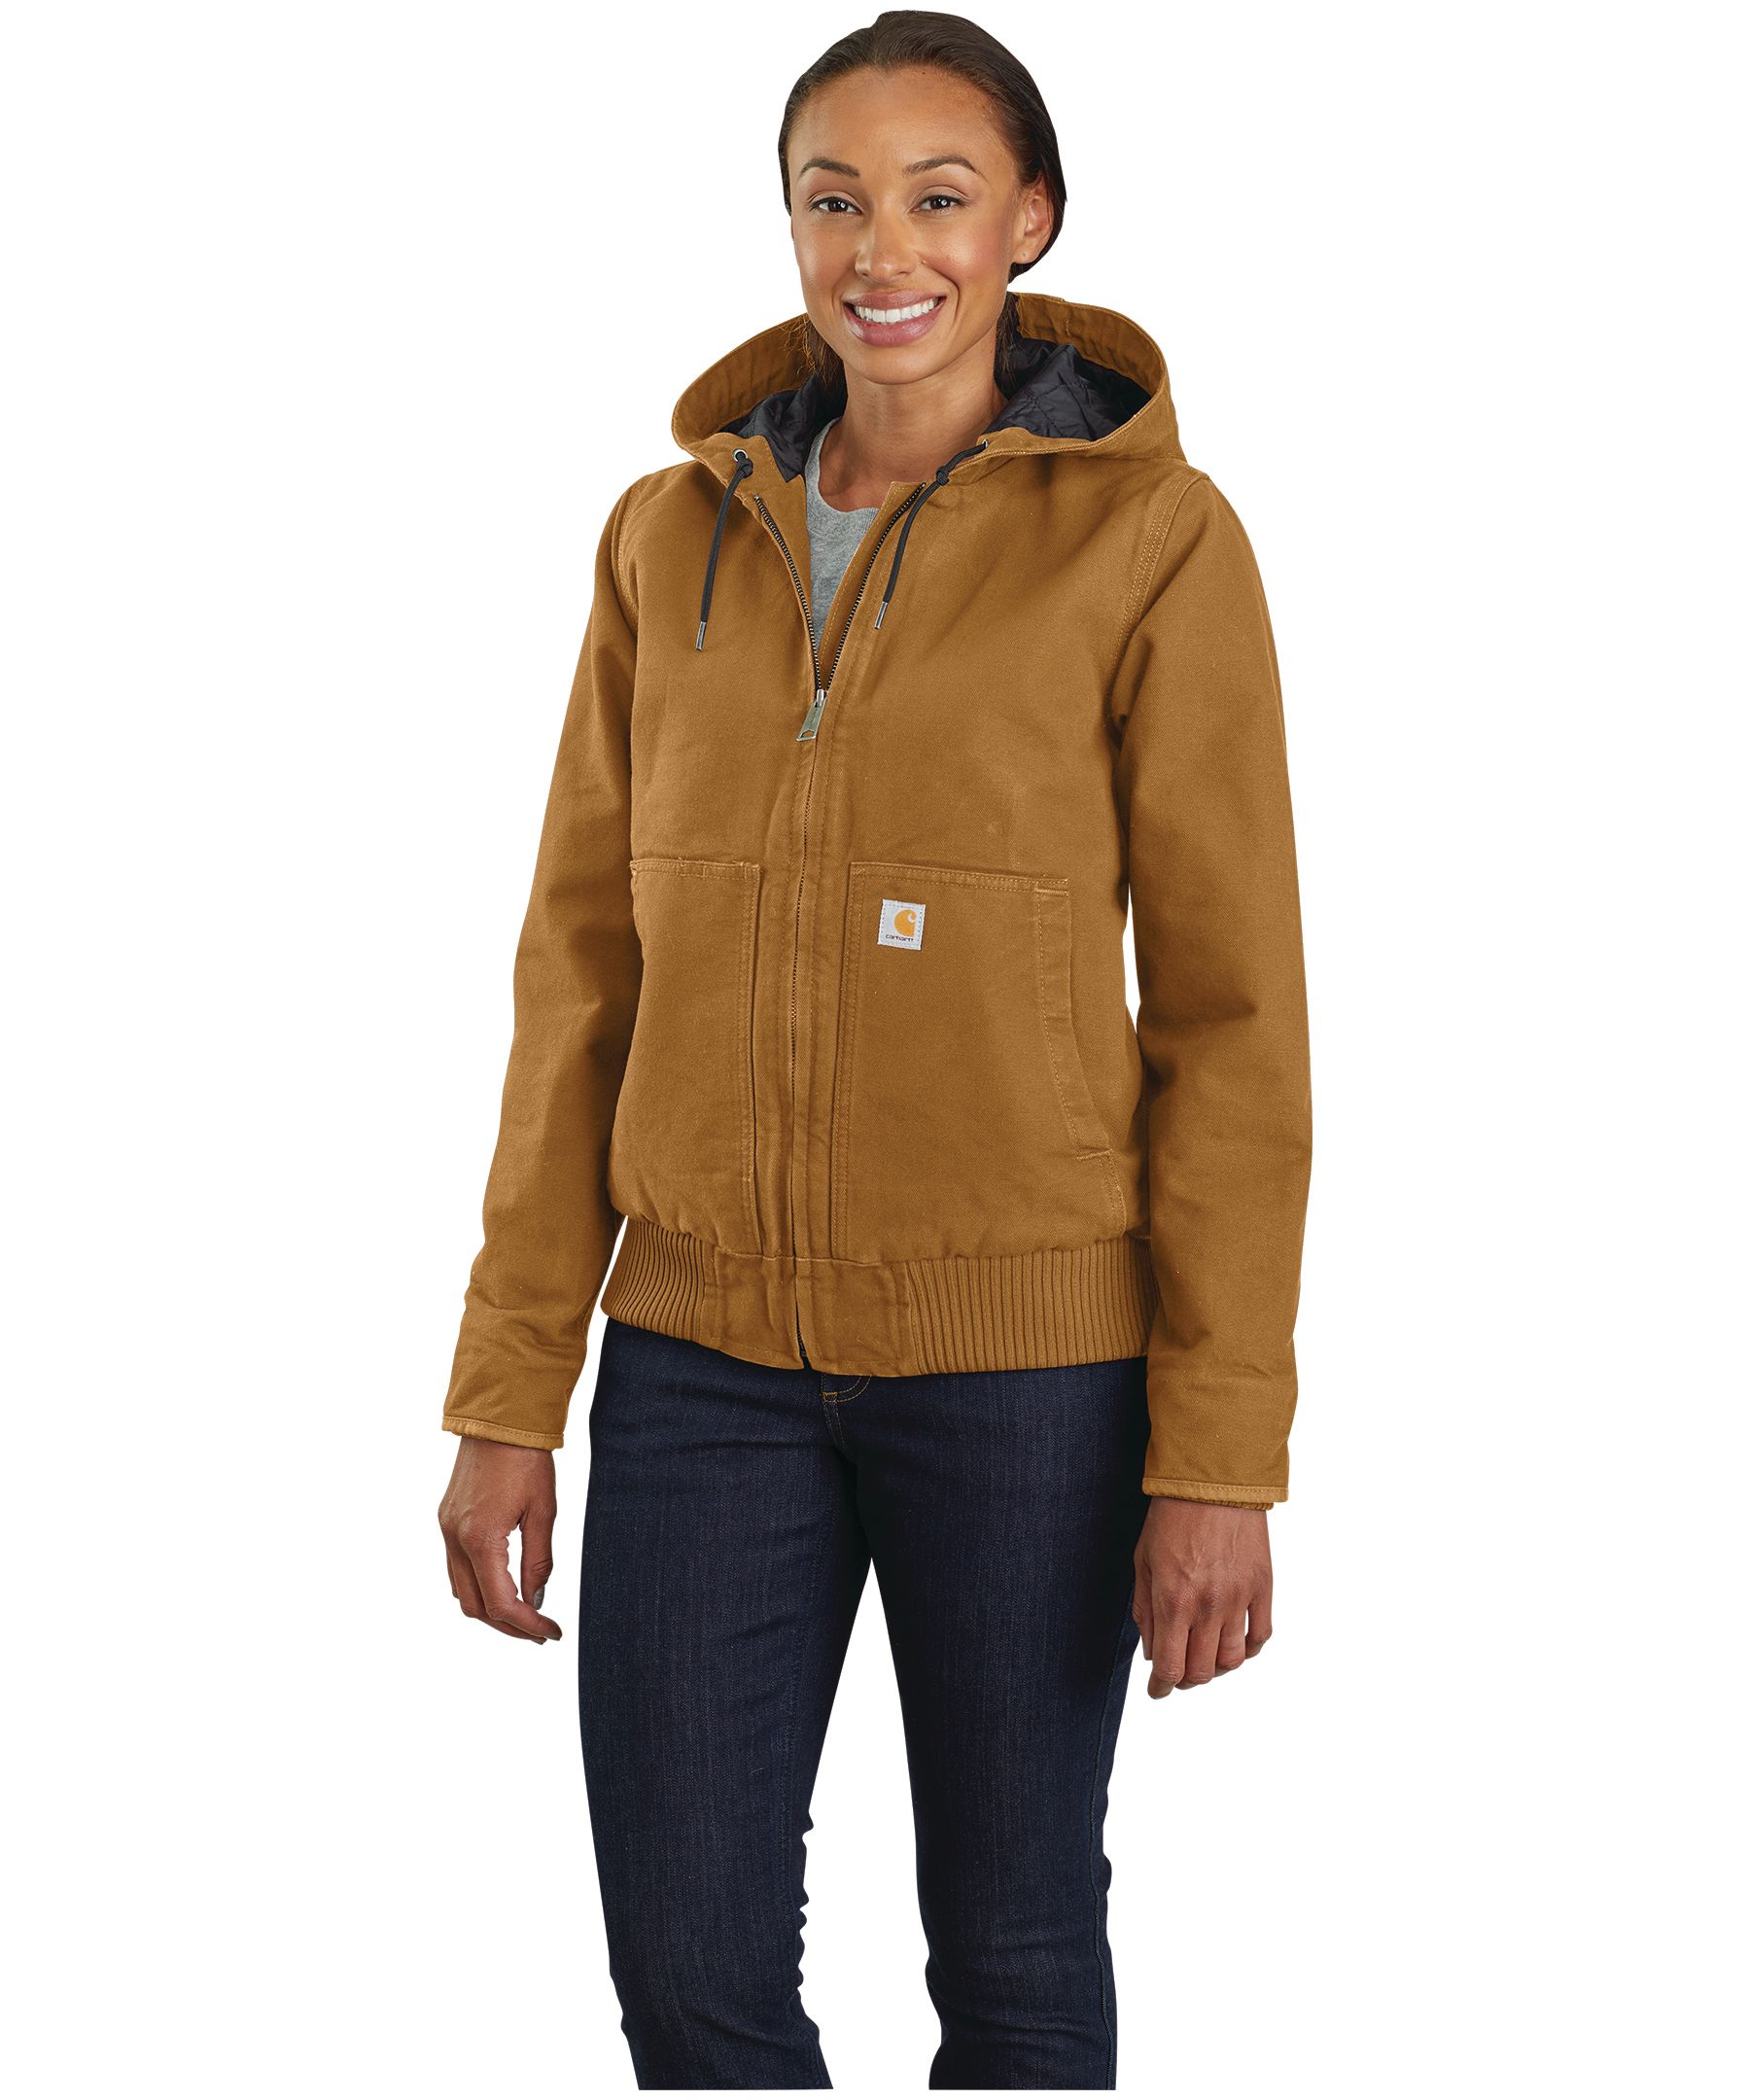 Carhartt Women's Washed Duck Loose Fit Insulated Active Jacket with Hood